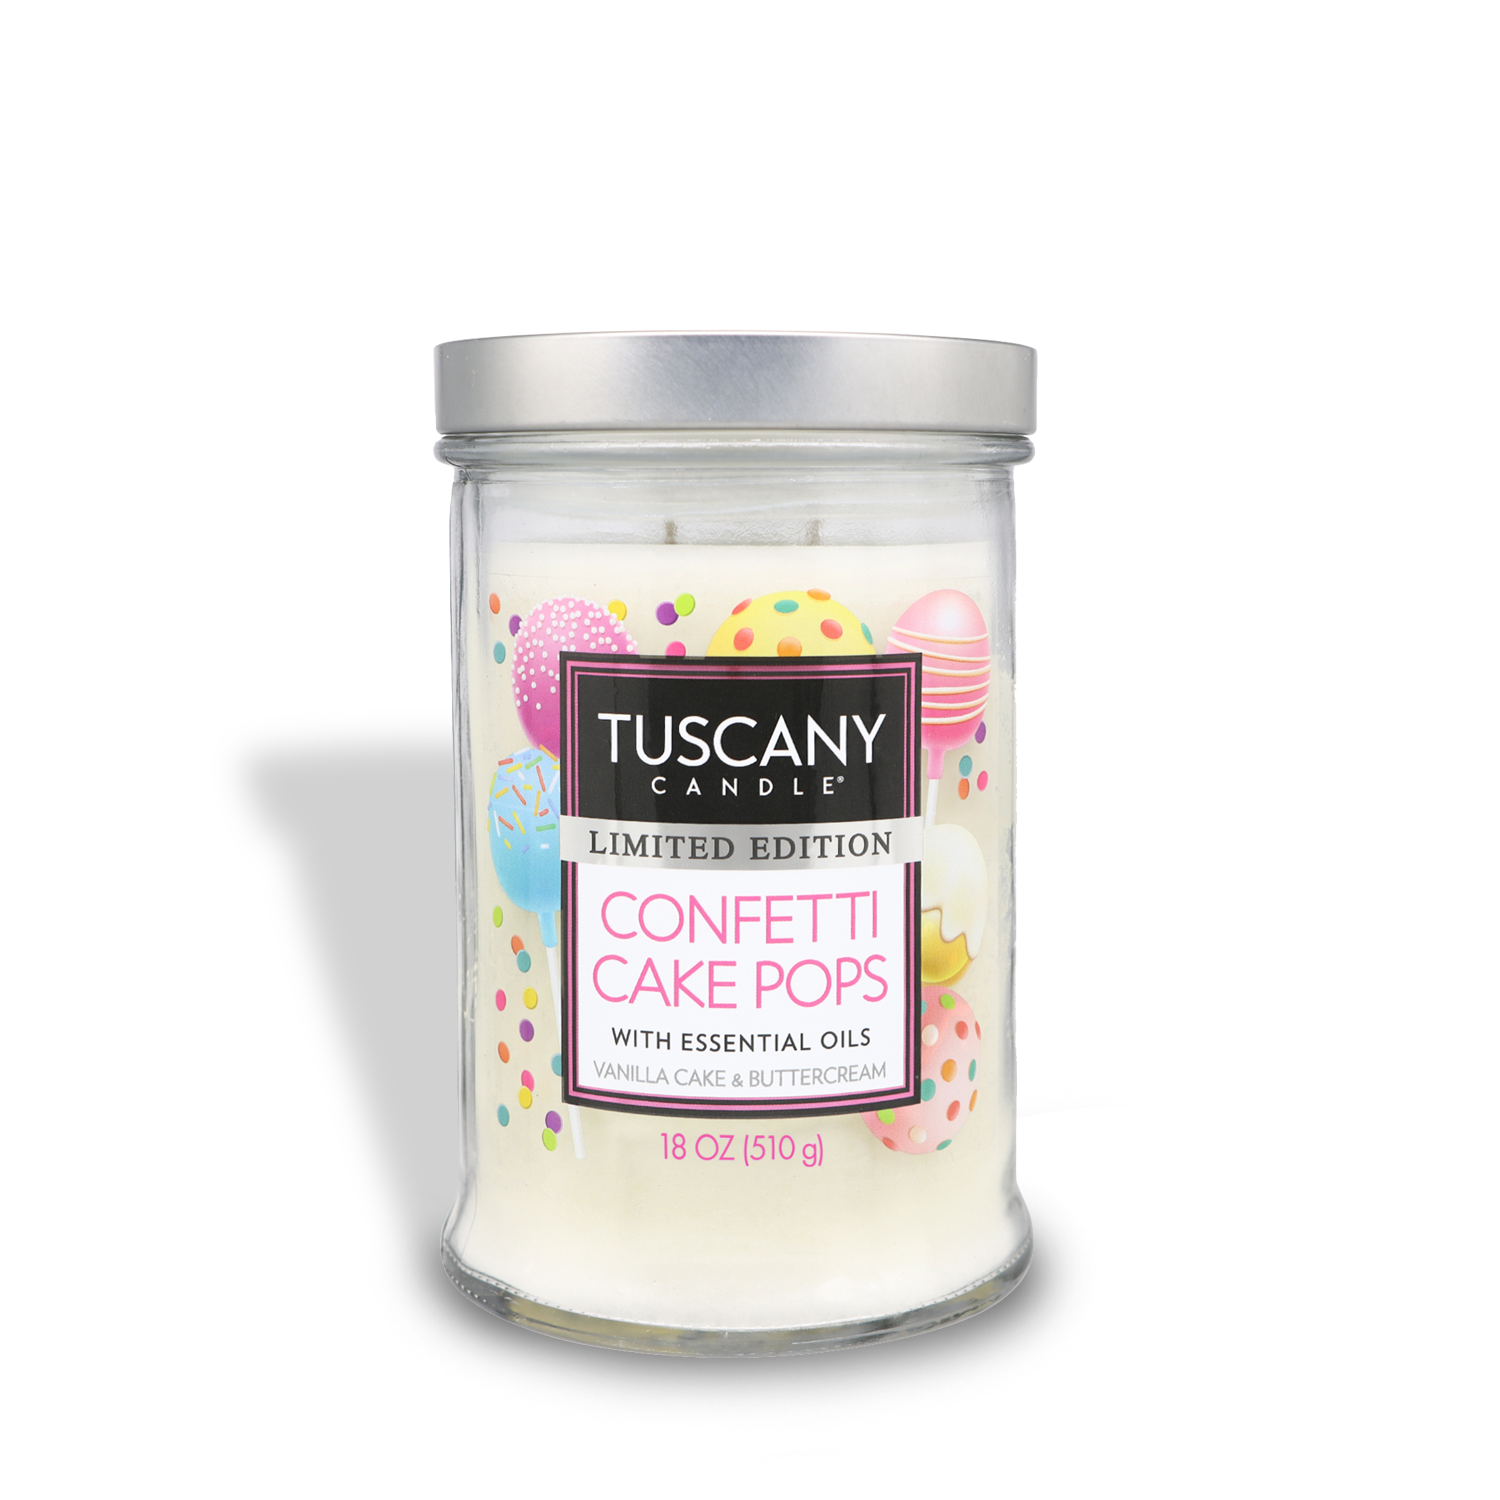 A Confetti Cake Pops Long-Lasting Scented Jar Candle (18 oz) in a jar.